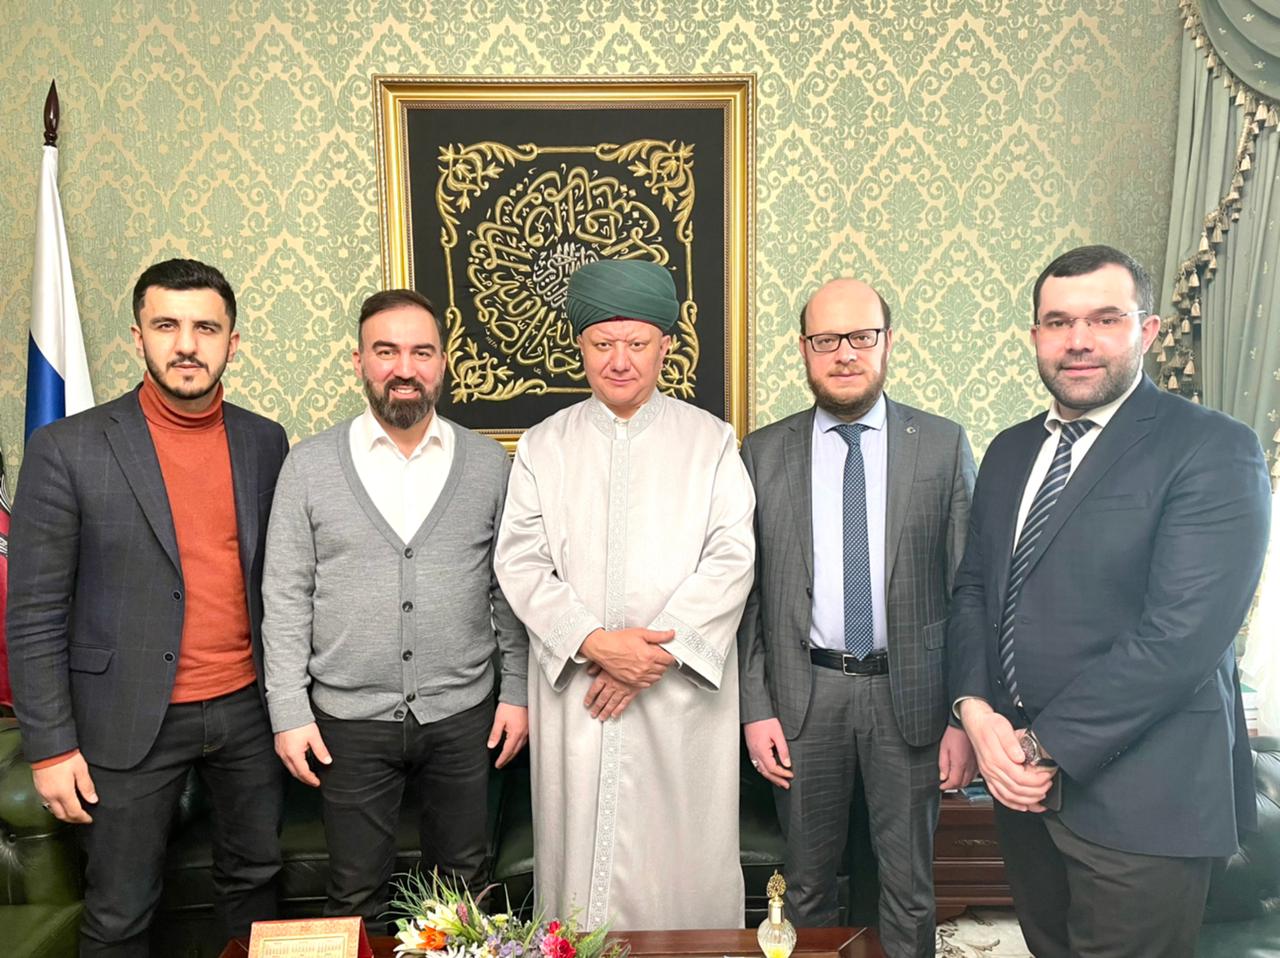 Albir Hazrat Krganov meets with the Advisor of the Department of Presidency of Religious Affairs of the Turkish Republic in Moscow